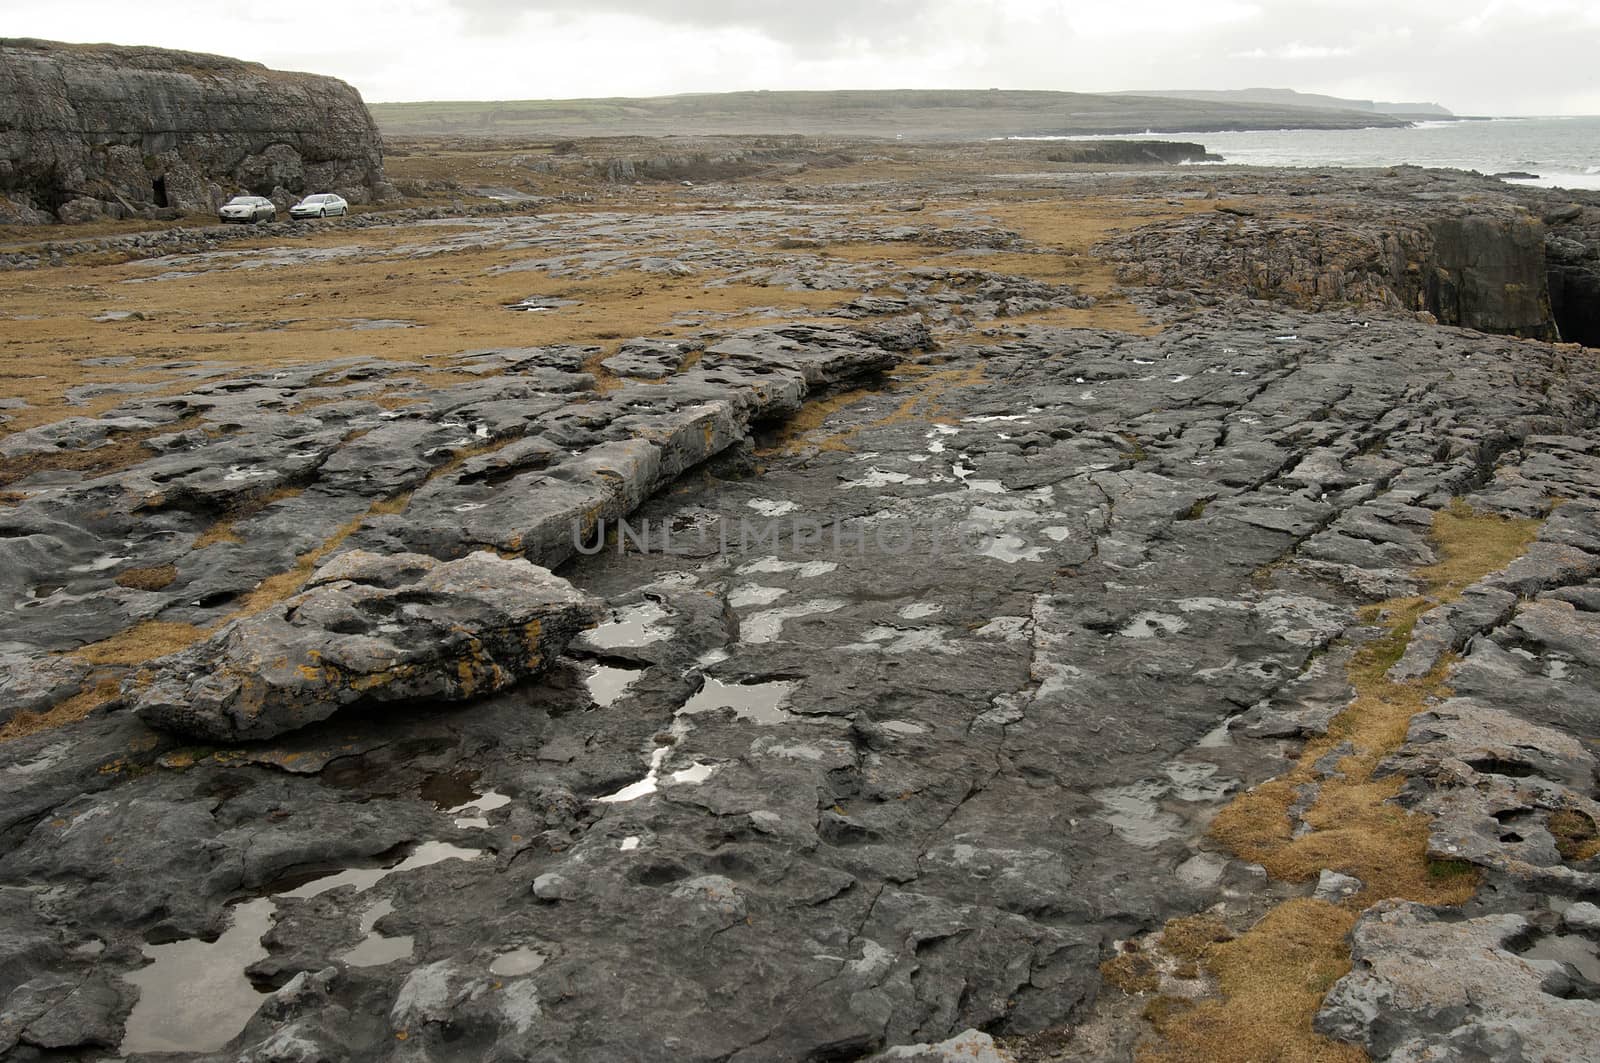 The Burren (Irish: Boireann, meaning "great rock") is a karst-landscape region or alvar in northwest County Clare, in Ireland. It is one of the largest karst landscapes in Europe.